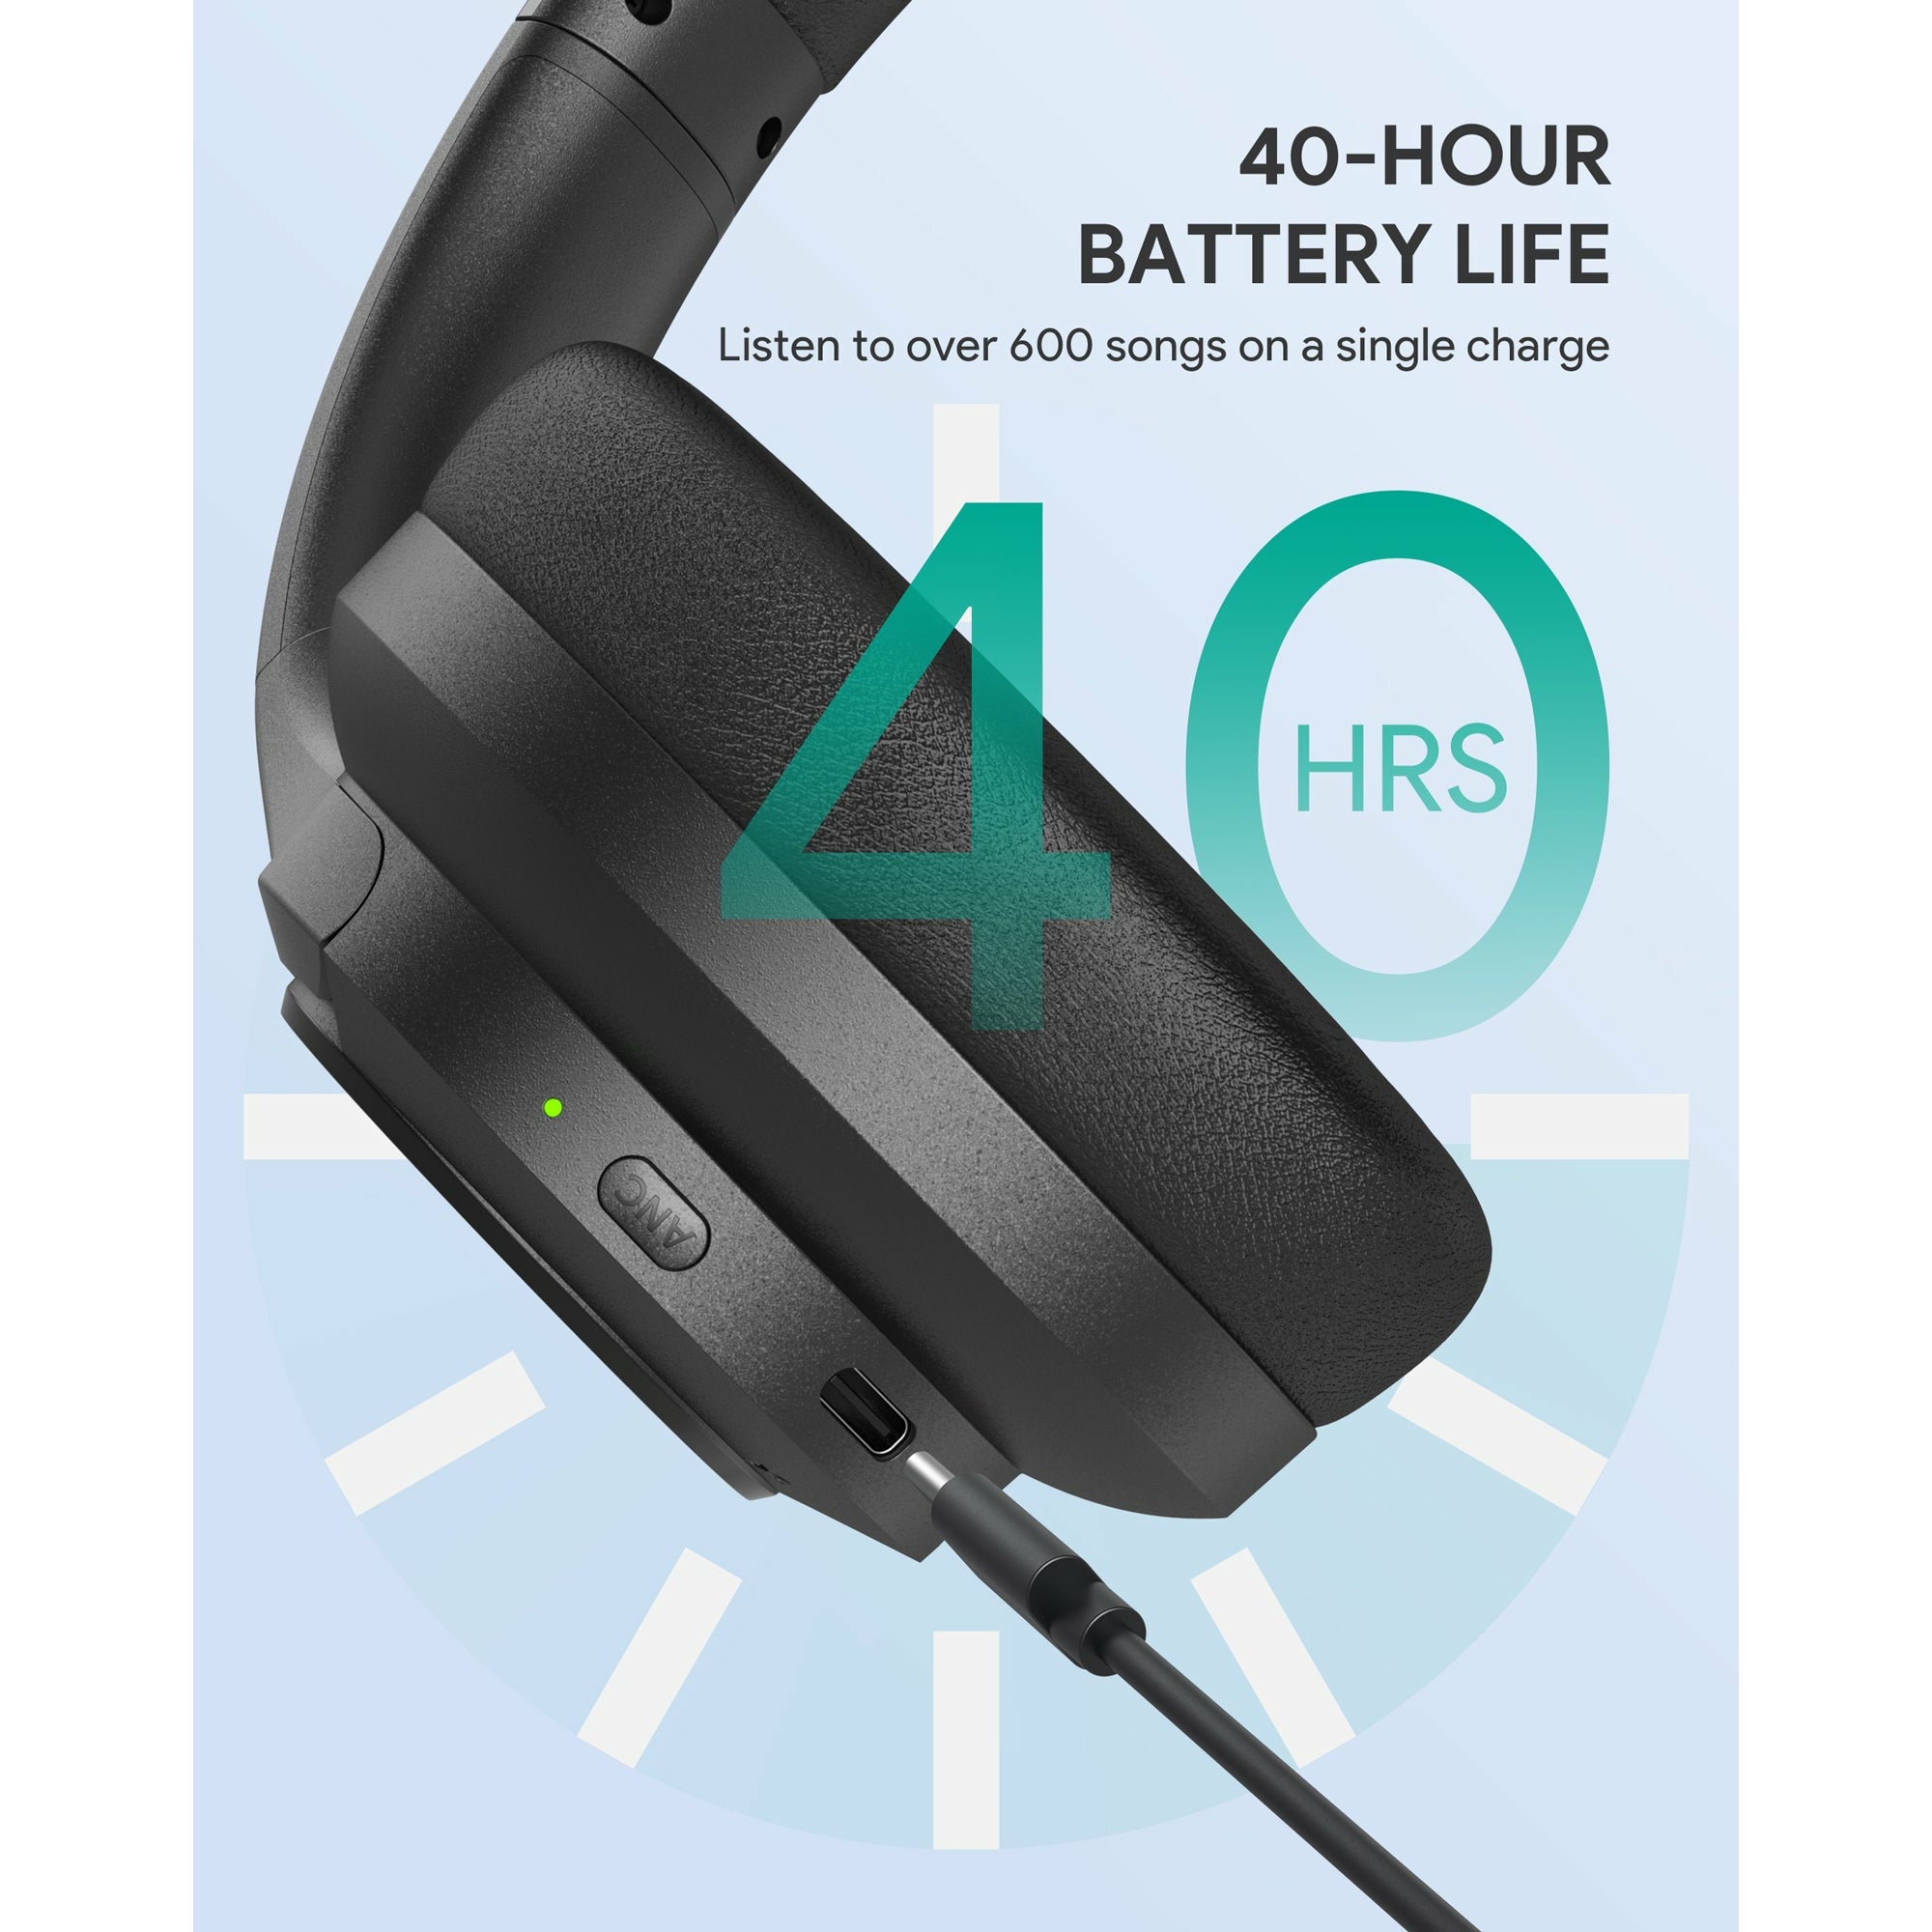 AUKEY EP-N12 Beyond Hybrid Active Noise Cancelling Headphones